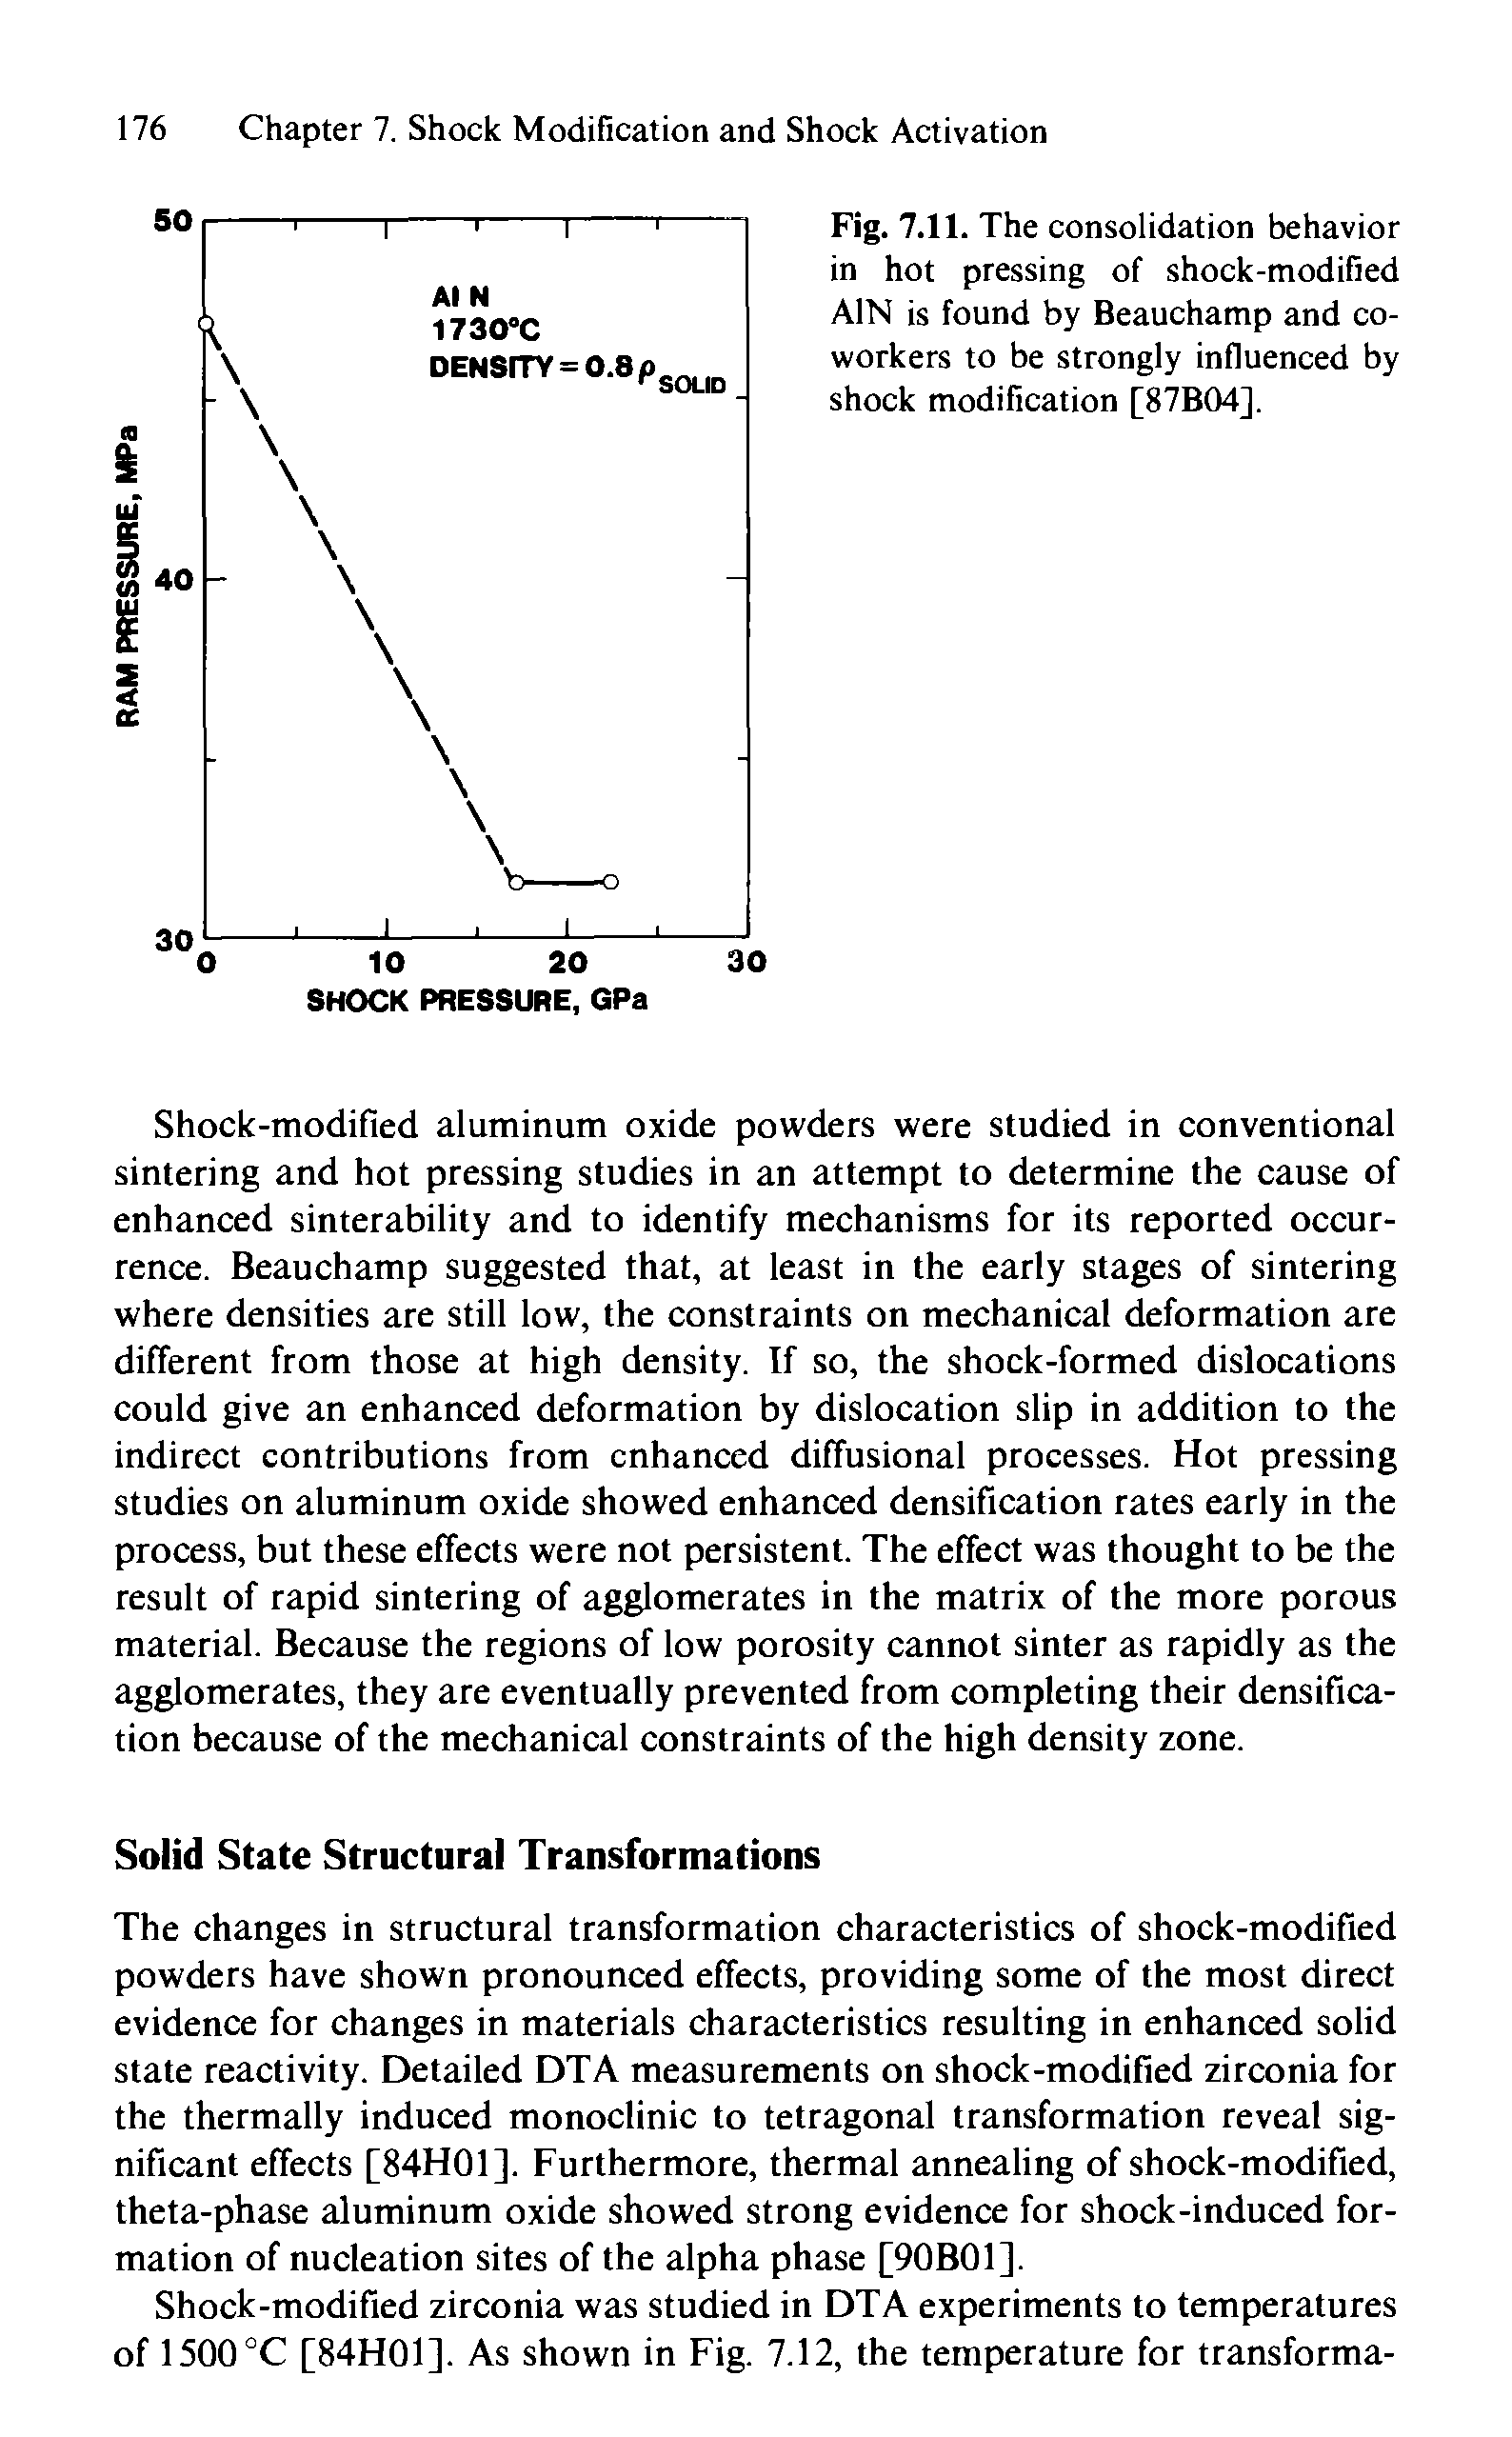 Fig. 7.11. The consolidation behavior in hot pressing of shock-modified AIN is found by Beauchamp and co-workers to be strongly influenced by shock modification [87B04].